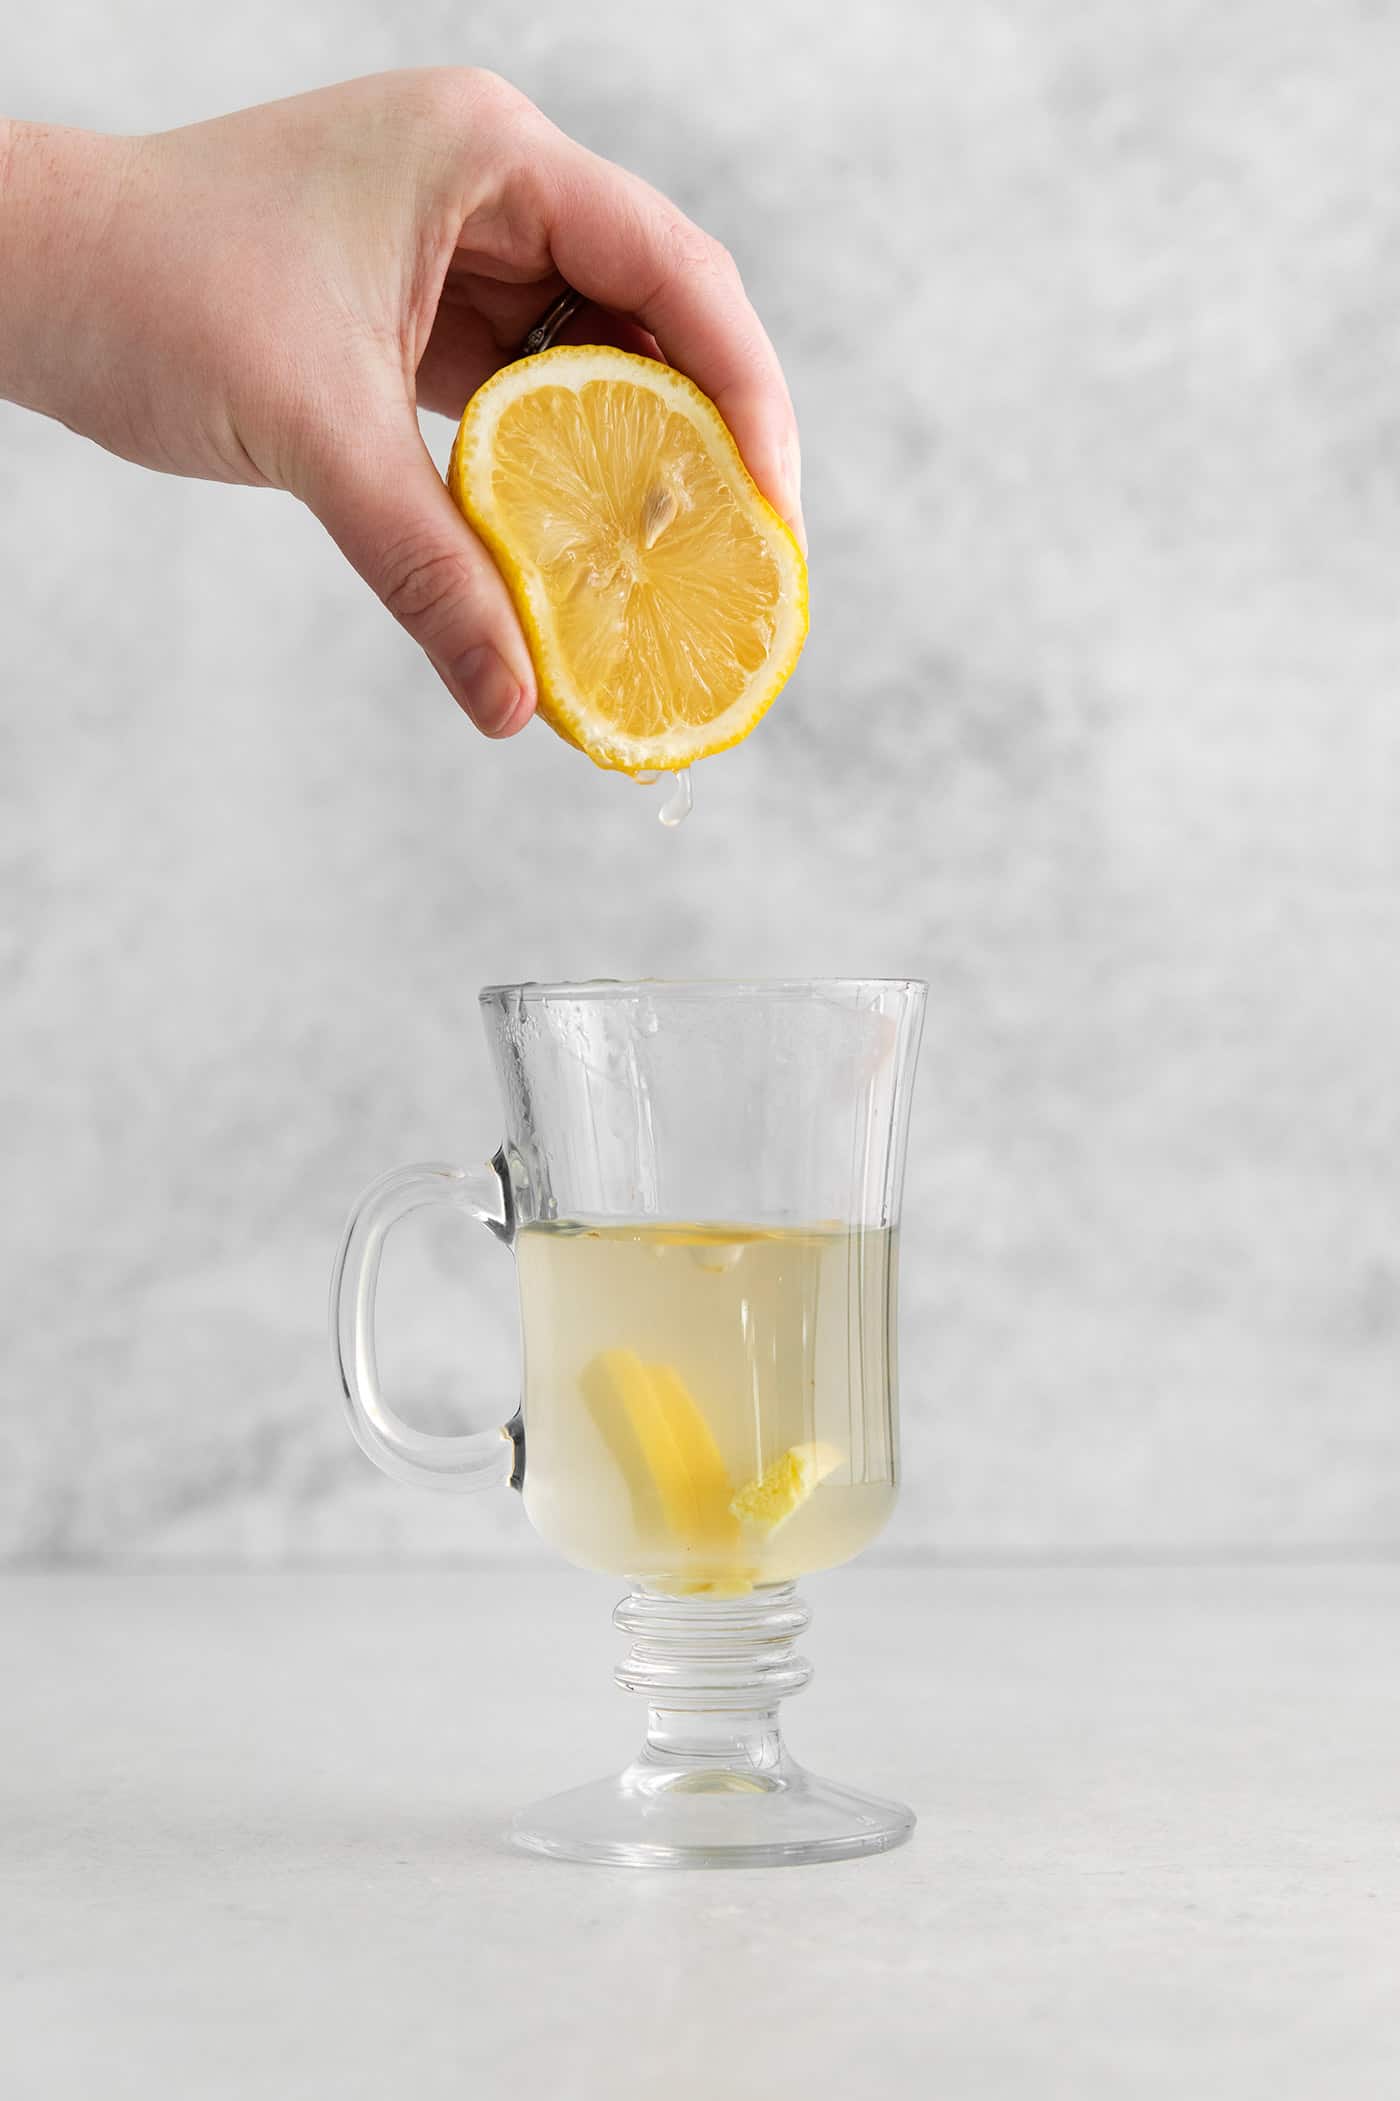 Lemon being squeezed into a mug of hot water and honey